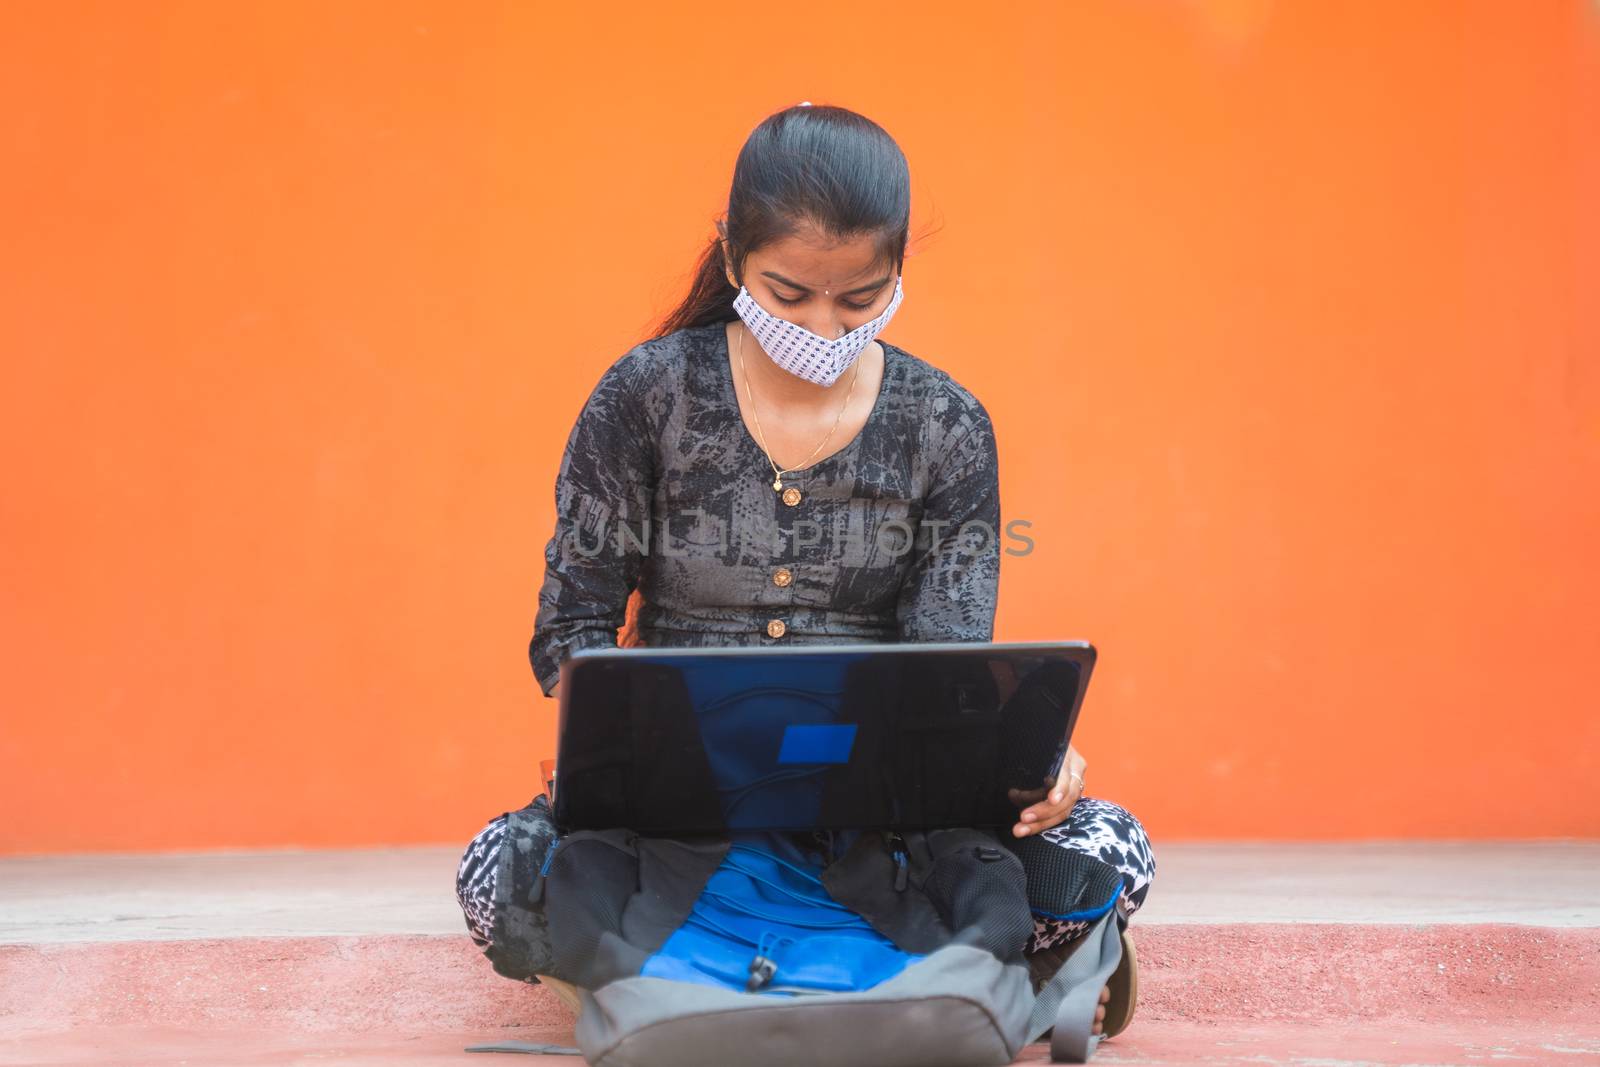 Young girl student in medical mask busy working on laptop at caollege corridor or universtiy campus - concept of college reopen, new normal due to coronavirus or covid-19 pandemic. by lakshmiprasad.maski@gmai.com